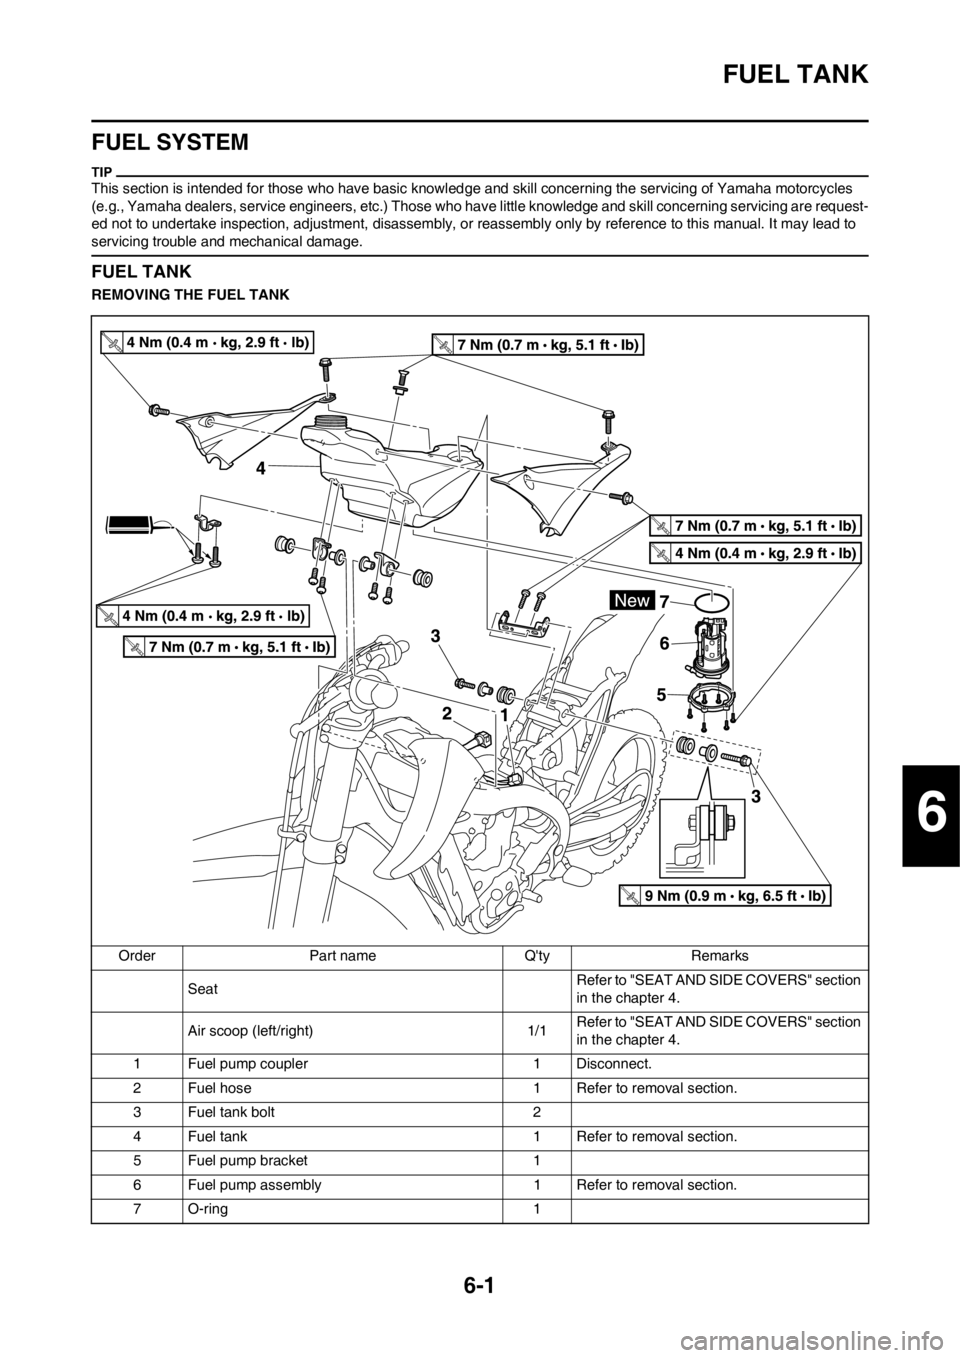 YAMAHA YZ450F 2012  Owners Manual 6-1
FUEL TANK
FUEL SYSTEM
This section is intended for those who have basic knowledge and skill concerning the servicing of Yamaha motorcycles 
(e.g., Yamaha dealers, service engineers, etc.) Those wh